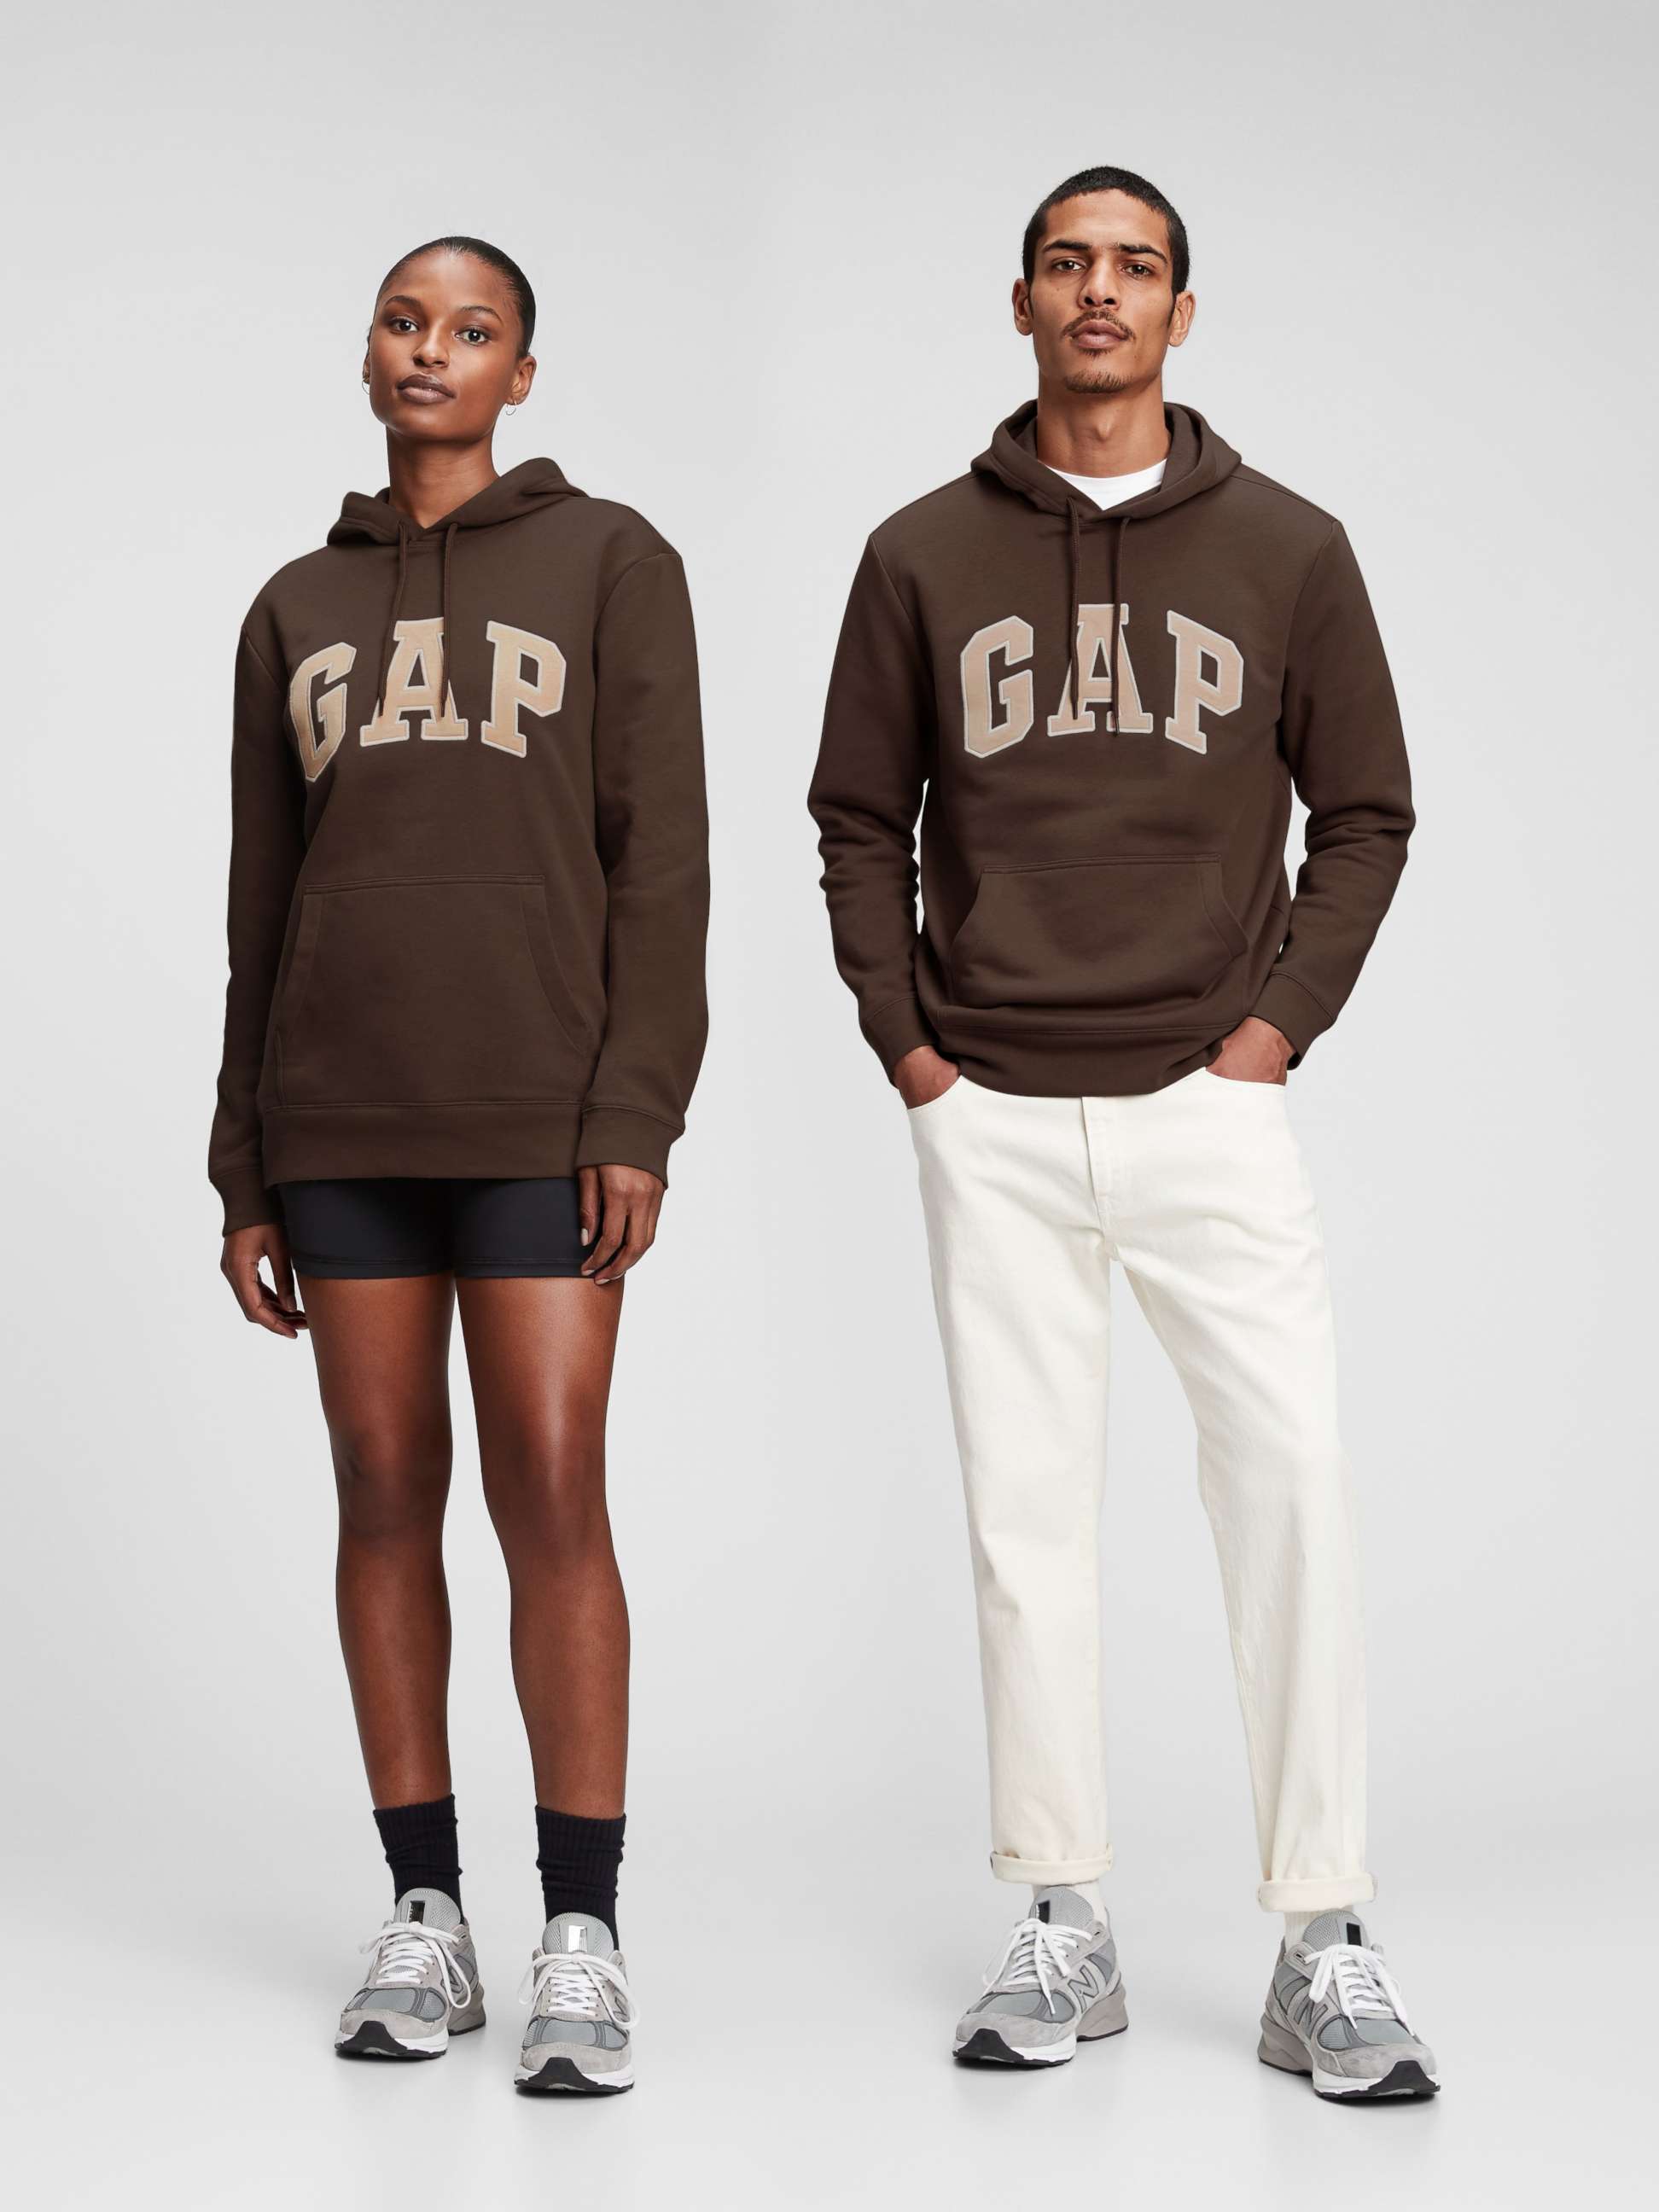 Gap's classic brown logo hoodie is making a comeback, thanks to